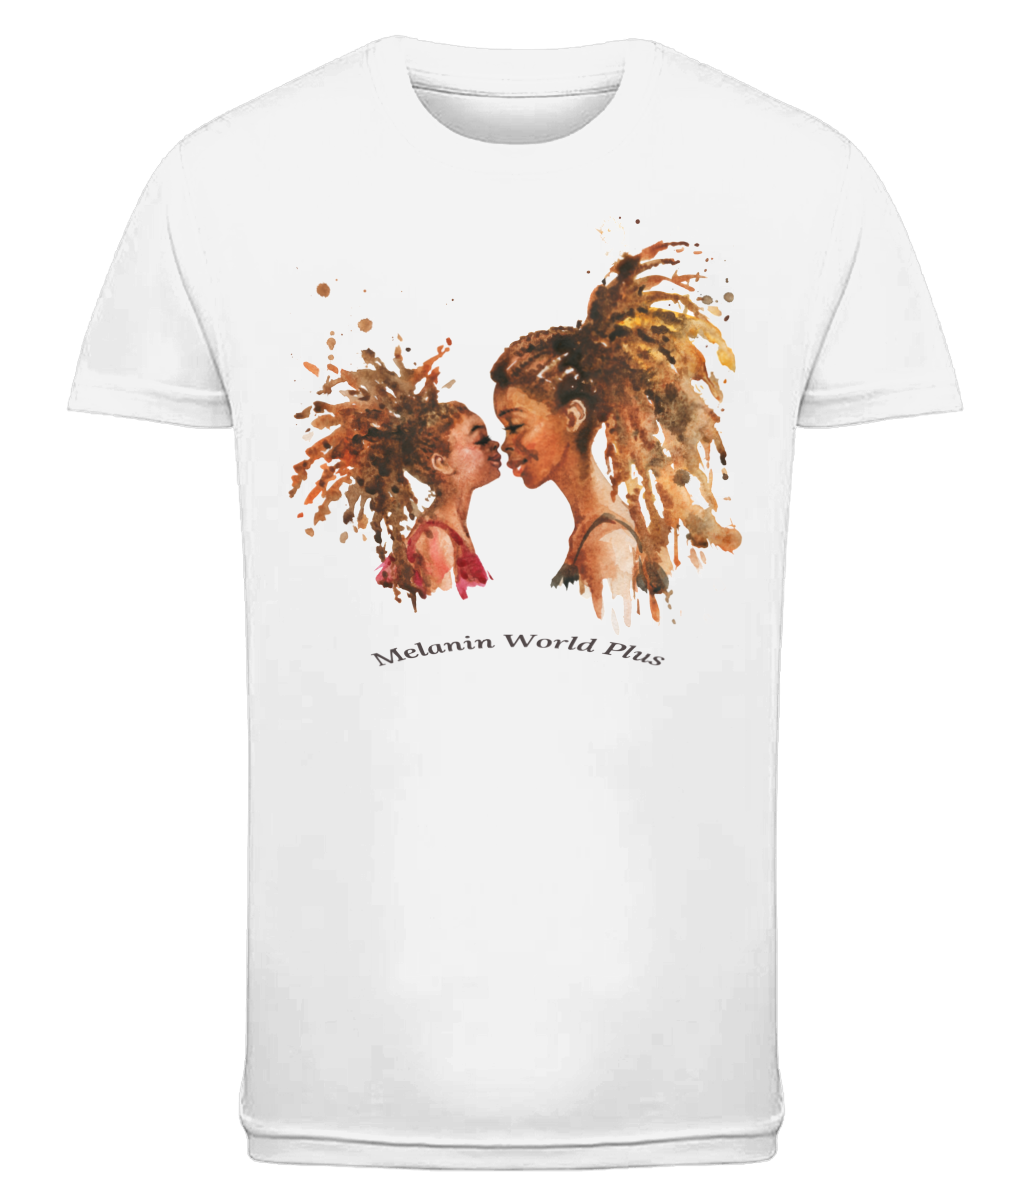 Mother and Daughter Love - Kids T-shirt - Various Colours Available - FAST UK DELIVERY